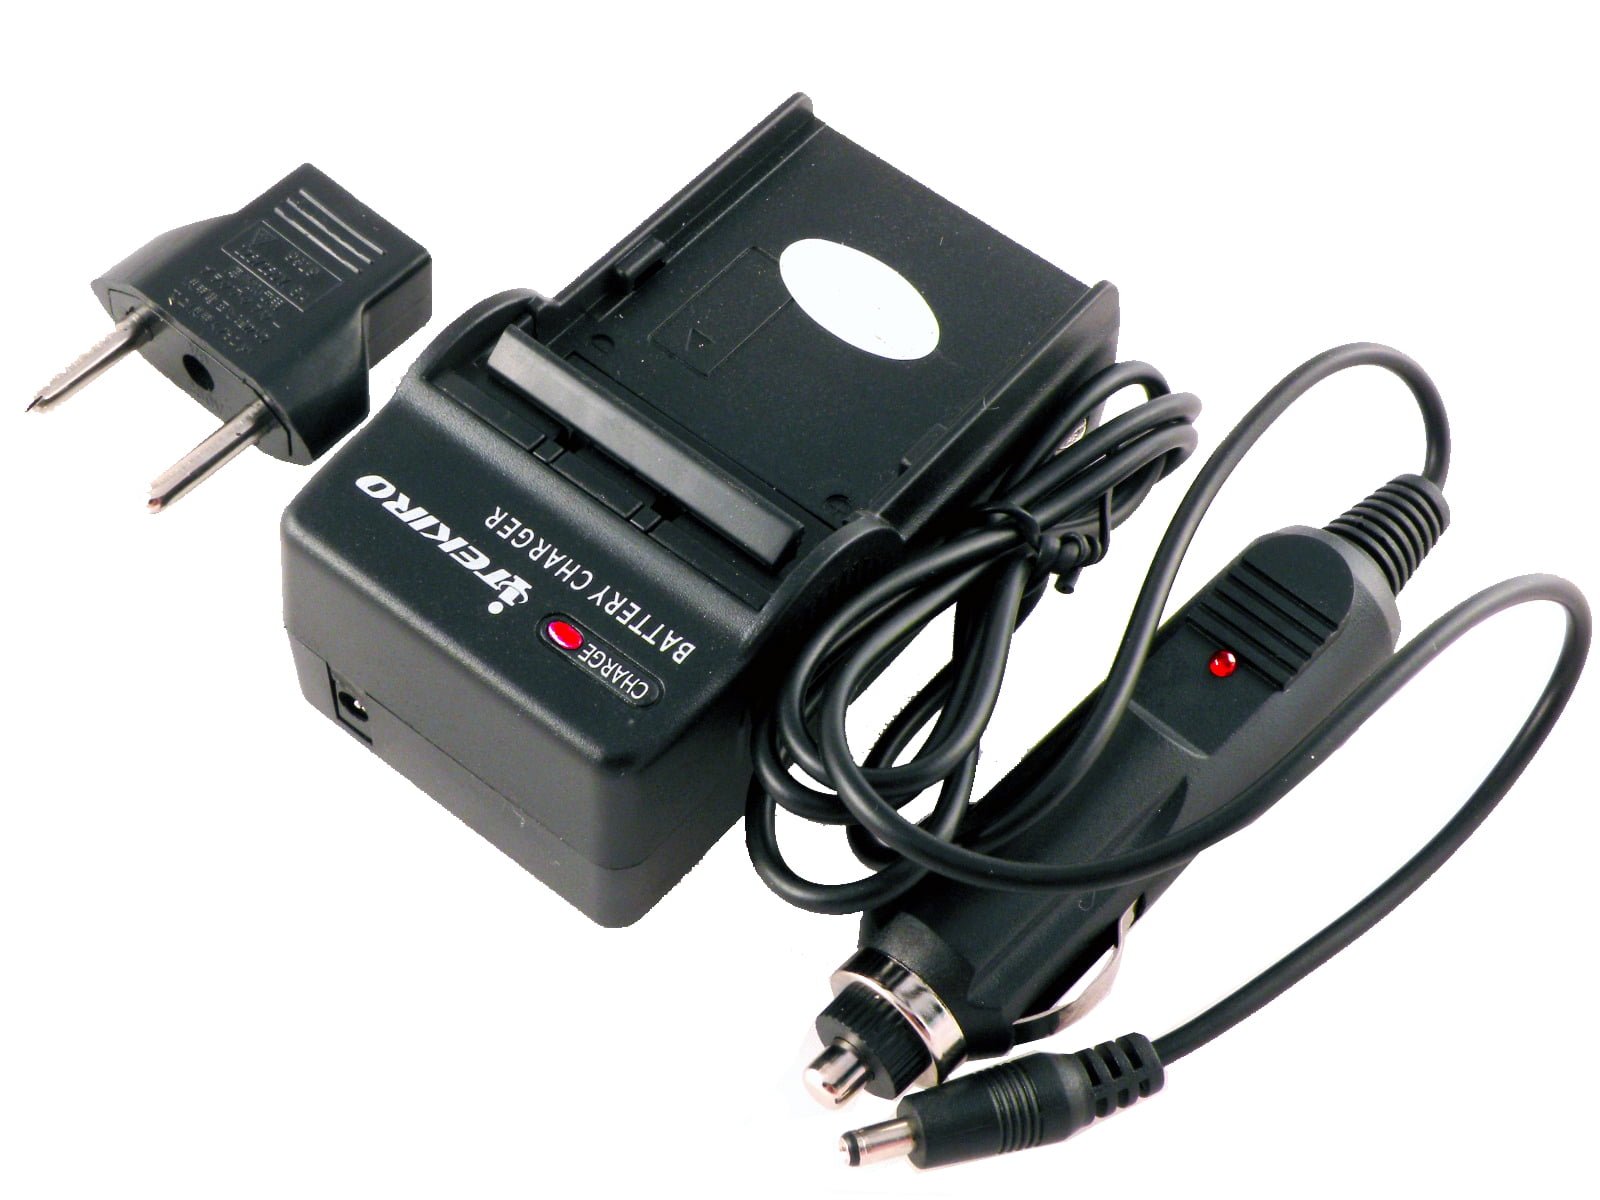 NP-FH40 Wasabi Power Battery Charger for Sony BC-TRP NP-FH30 NP-FH50, 